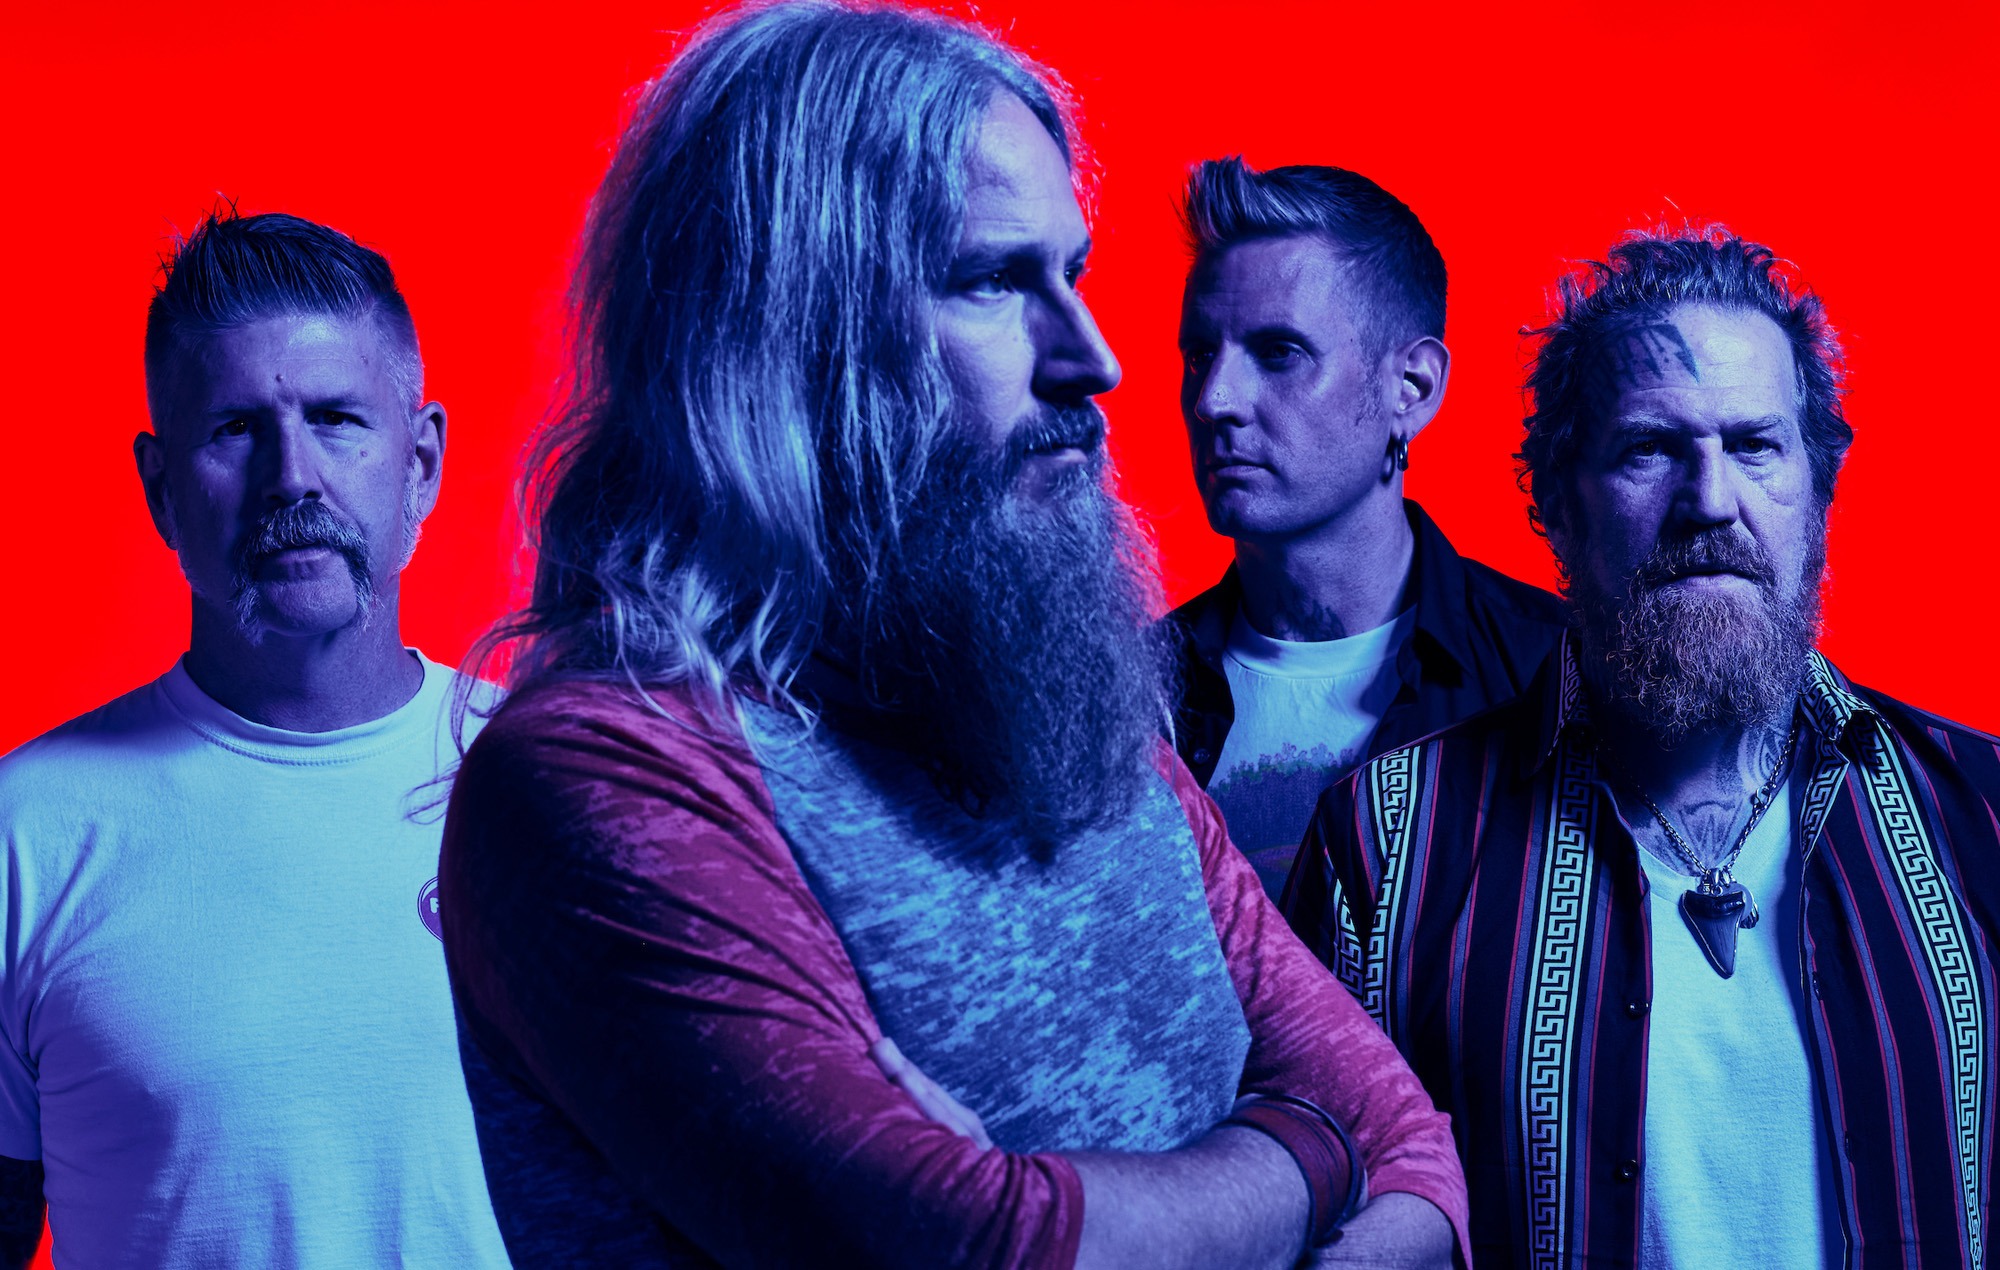 Mastodon: “We don’t talk about our feelings with each other, we just put them in the lyrics”